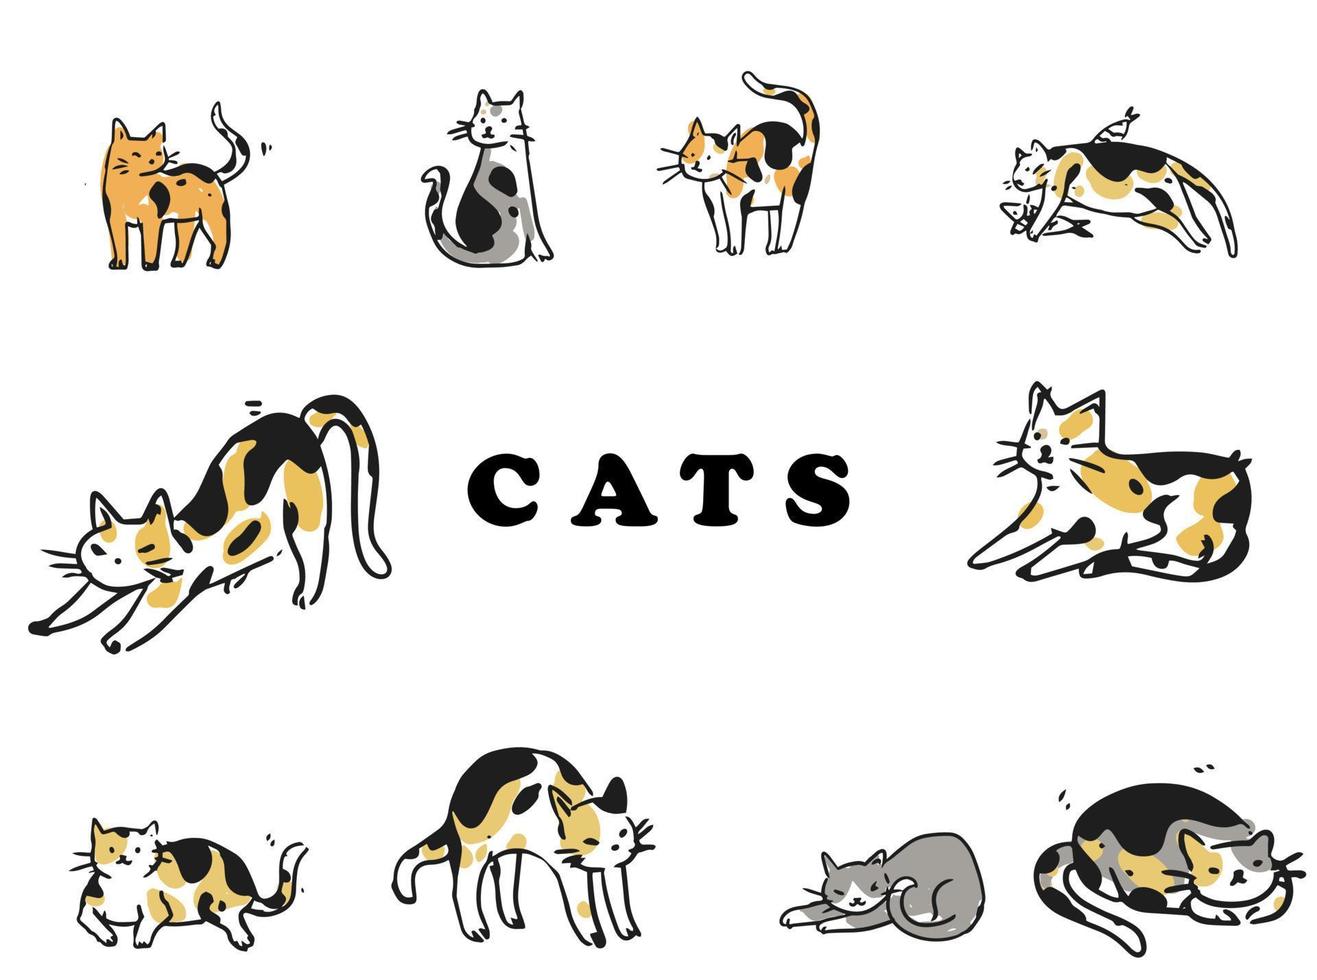 Cat icon flat hand drawn classic outline vector